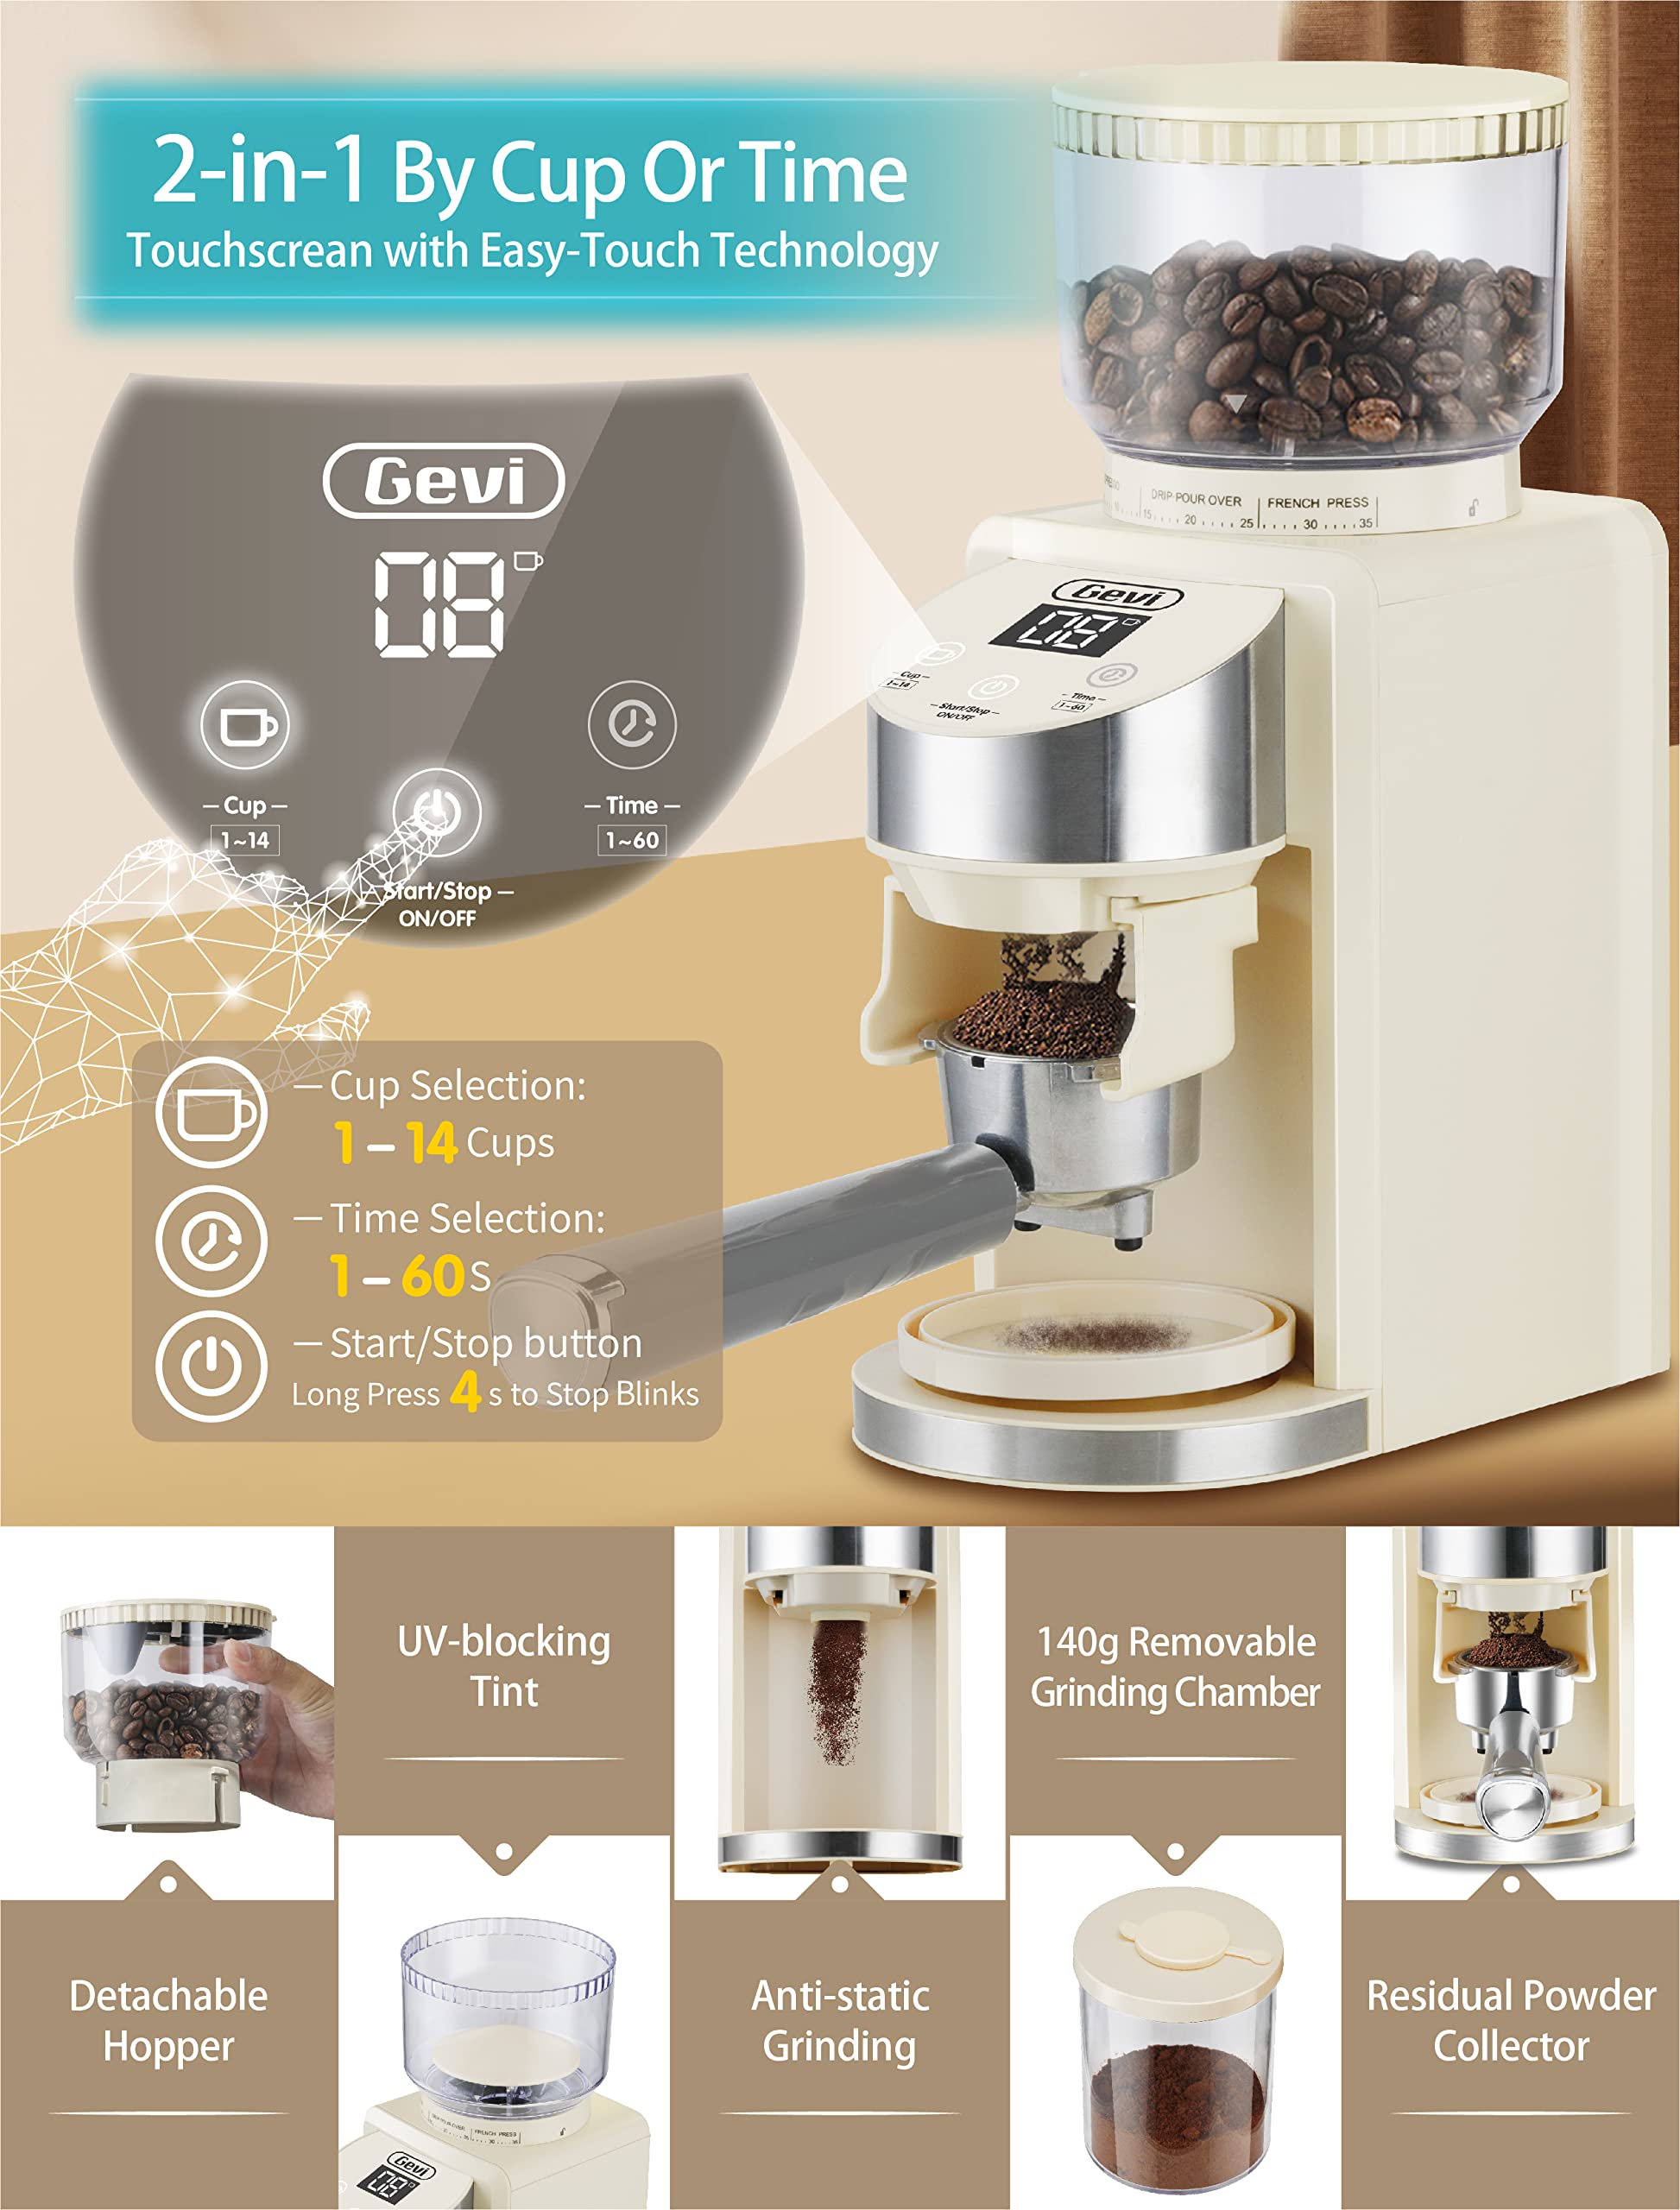 Gevi 20 Bar Compact Professional Espresso Coffee Machine with Milk Frother for Espresso, Latte and Cappuccino with Gevi Burr Coffee Grinder with 35 Precise Grind Settings, Beige